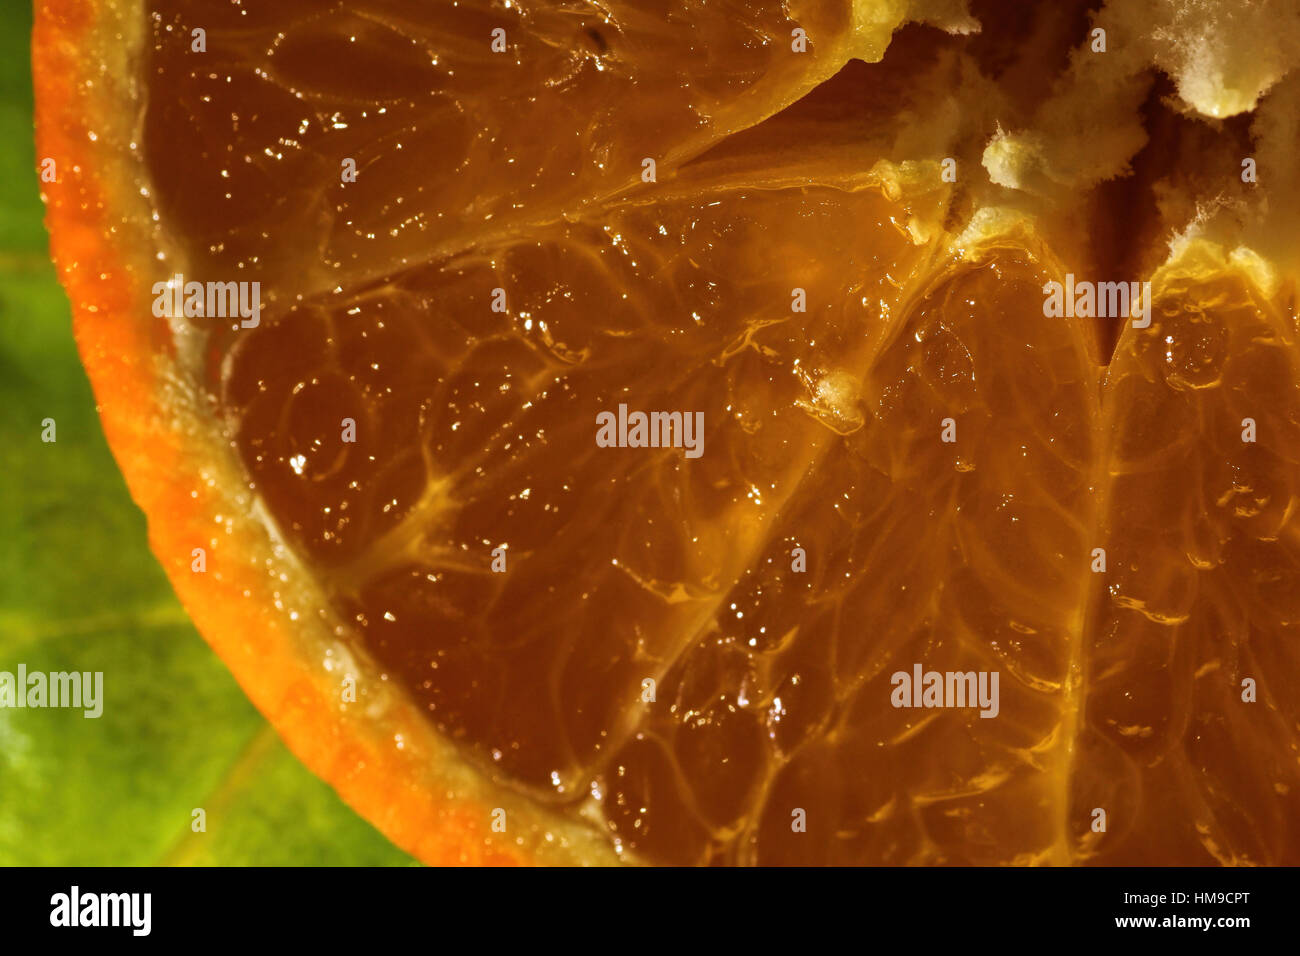 Juicy orange up close on a green background Stock Photo